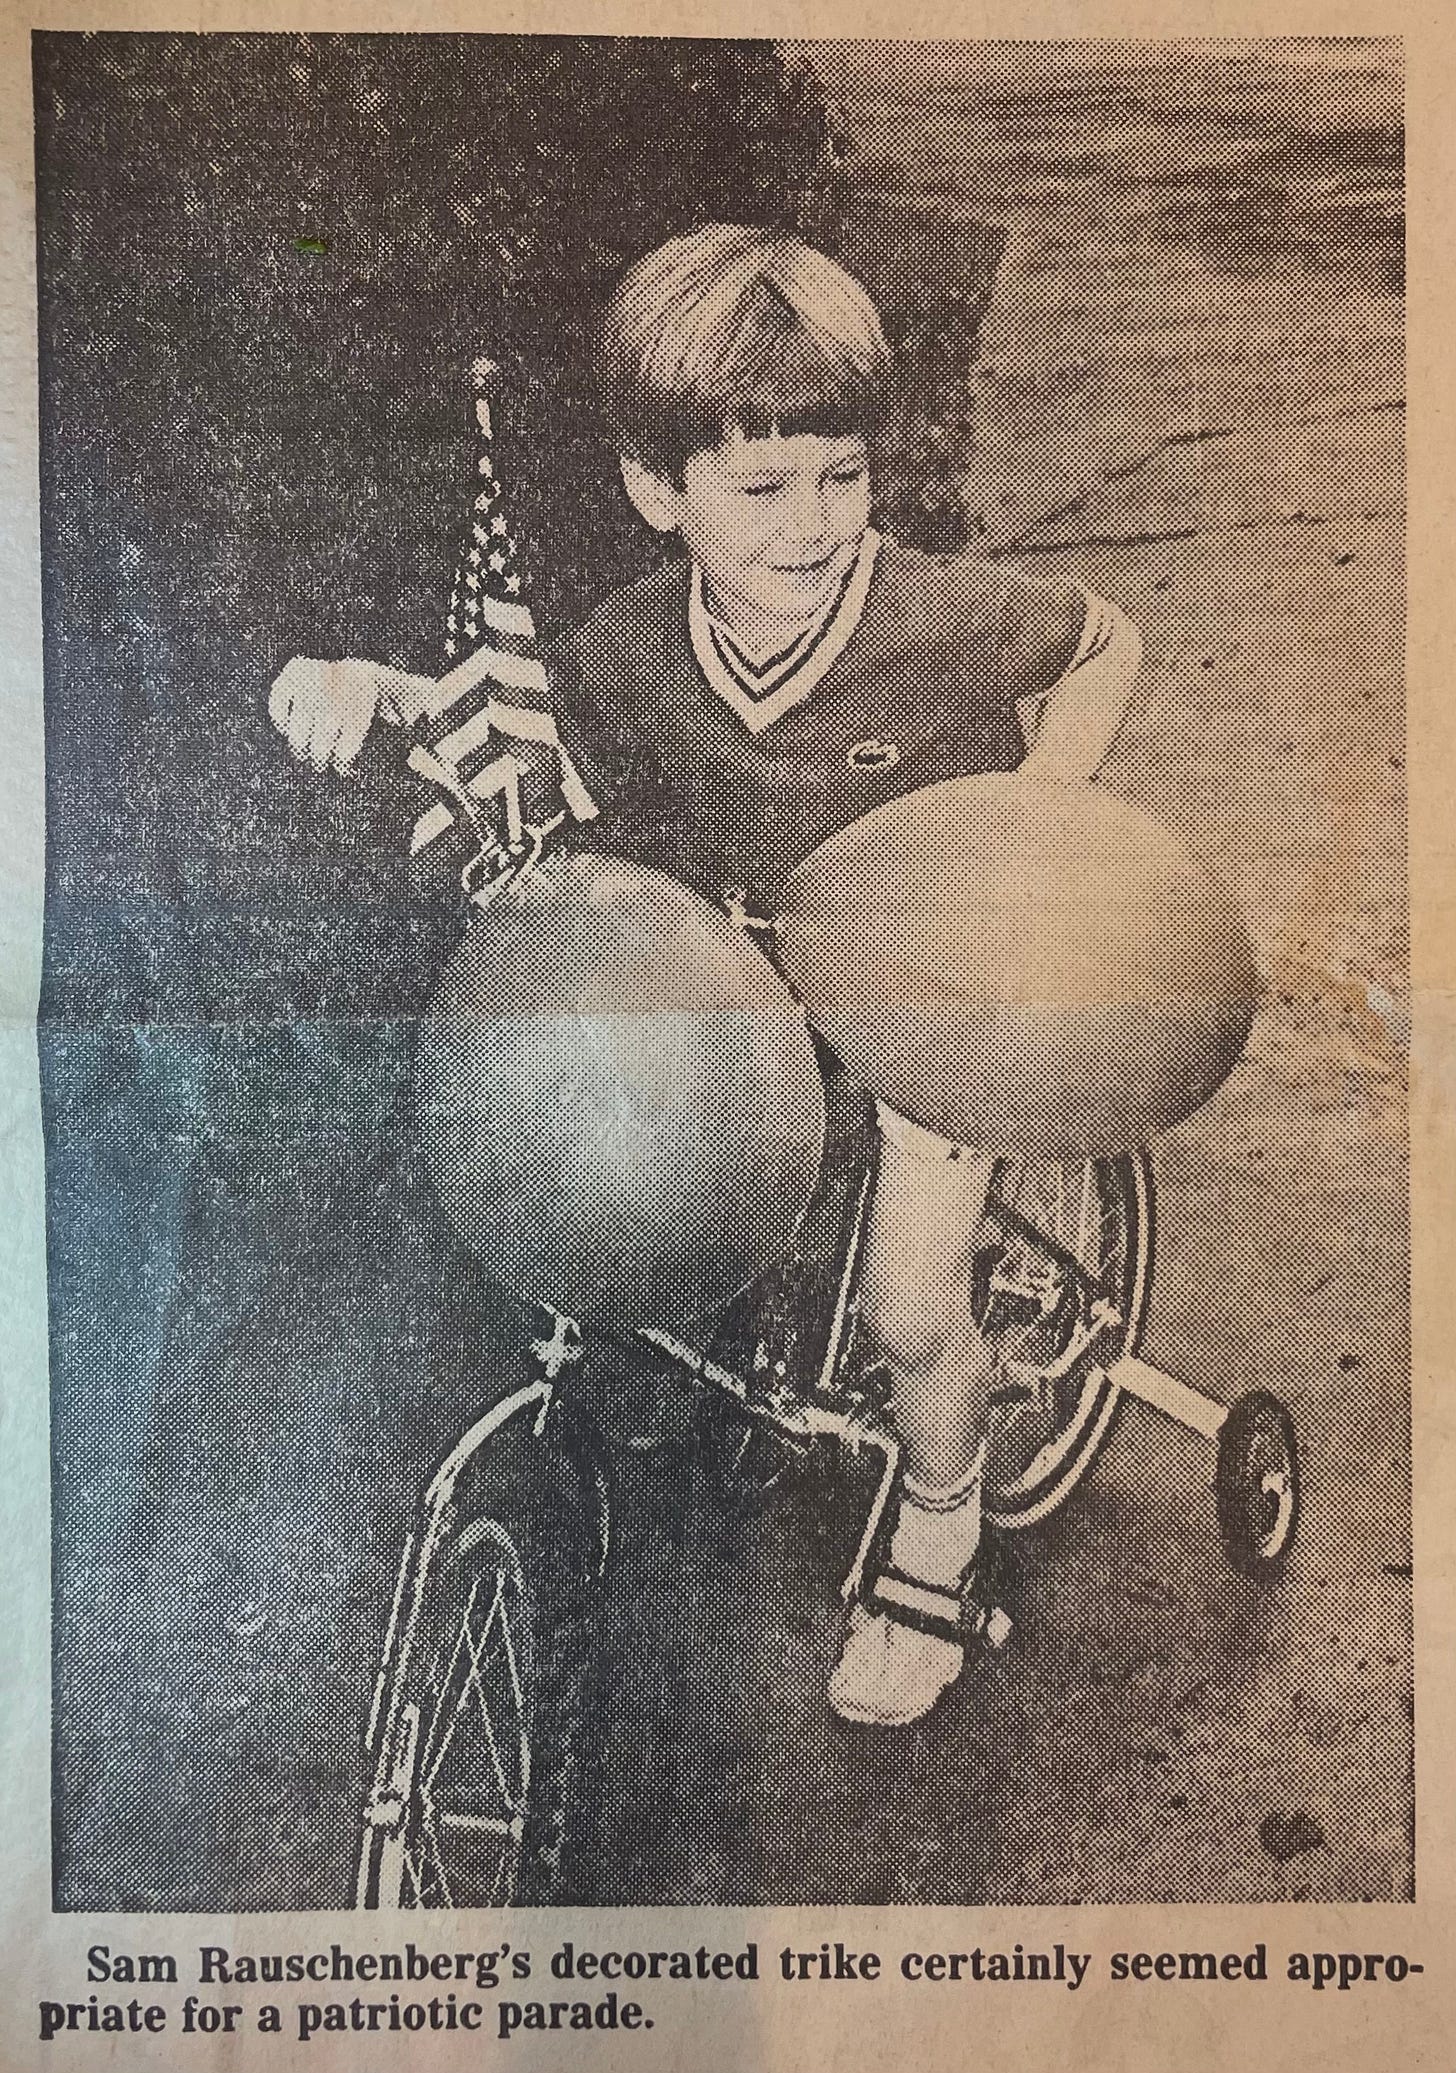 Photograph of author in 1989 with decorated bike. July 7, 1989 issue of the Dalton Advertiser (props to my mom for tracking it down on short notice)